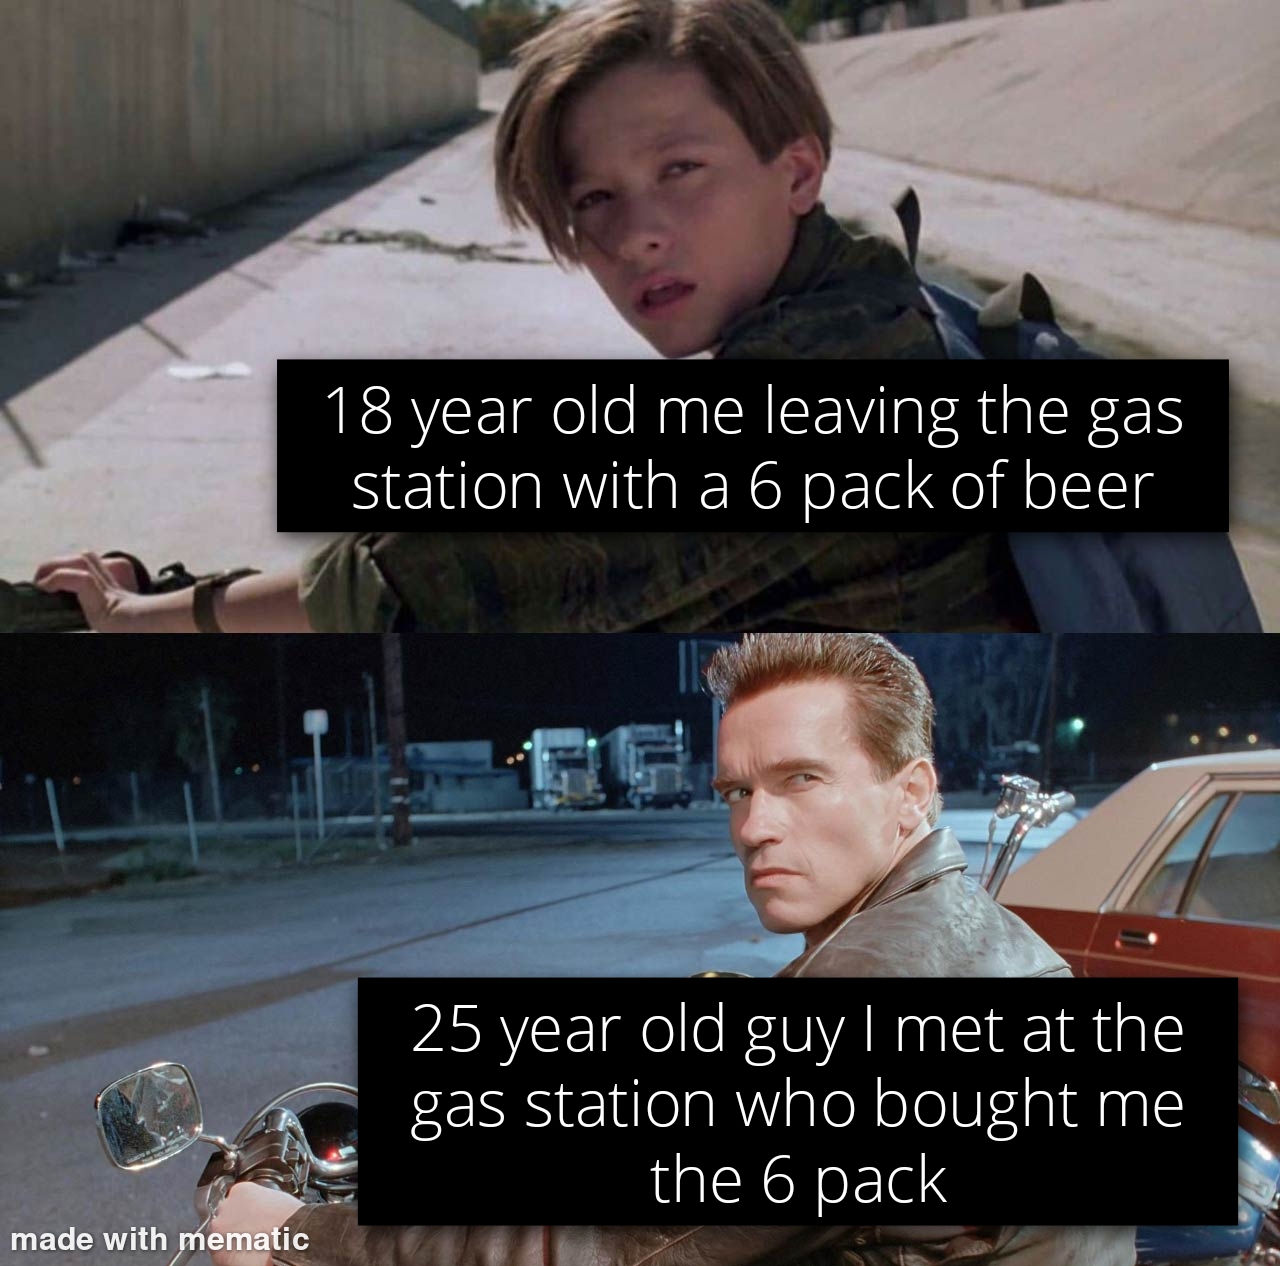 terminator 2 - 18 year old me leaving the gas station with a 6 pack of beer 25 year old guy I met at the gas station who bought me the 6 pack made with mematic